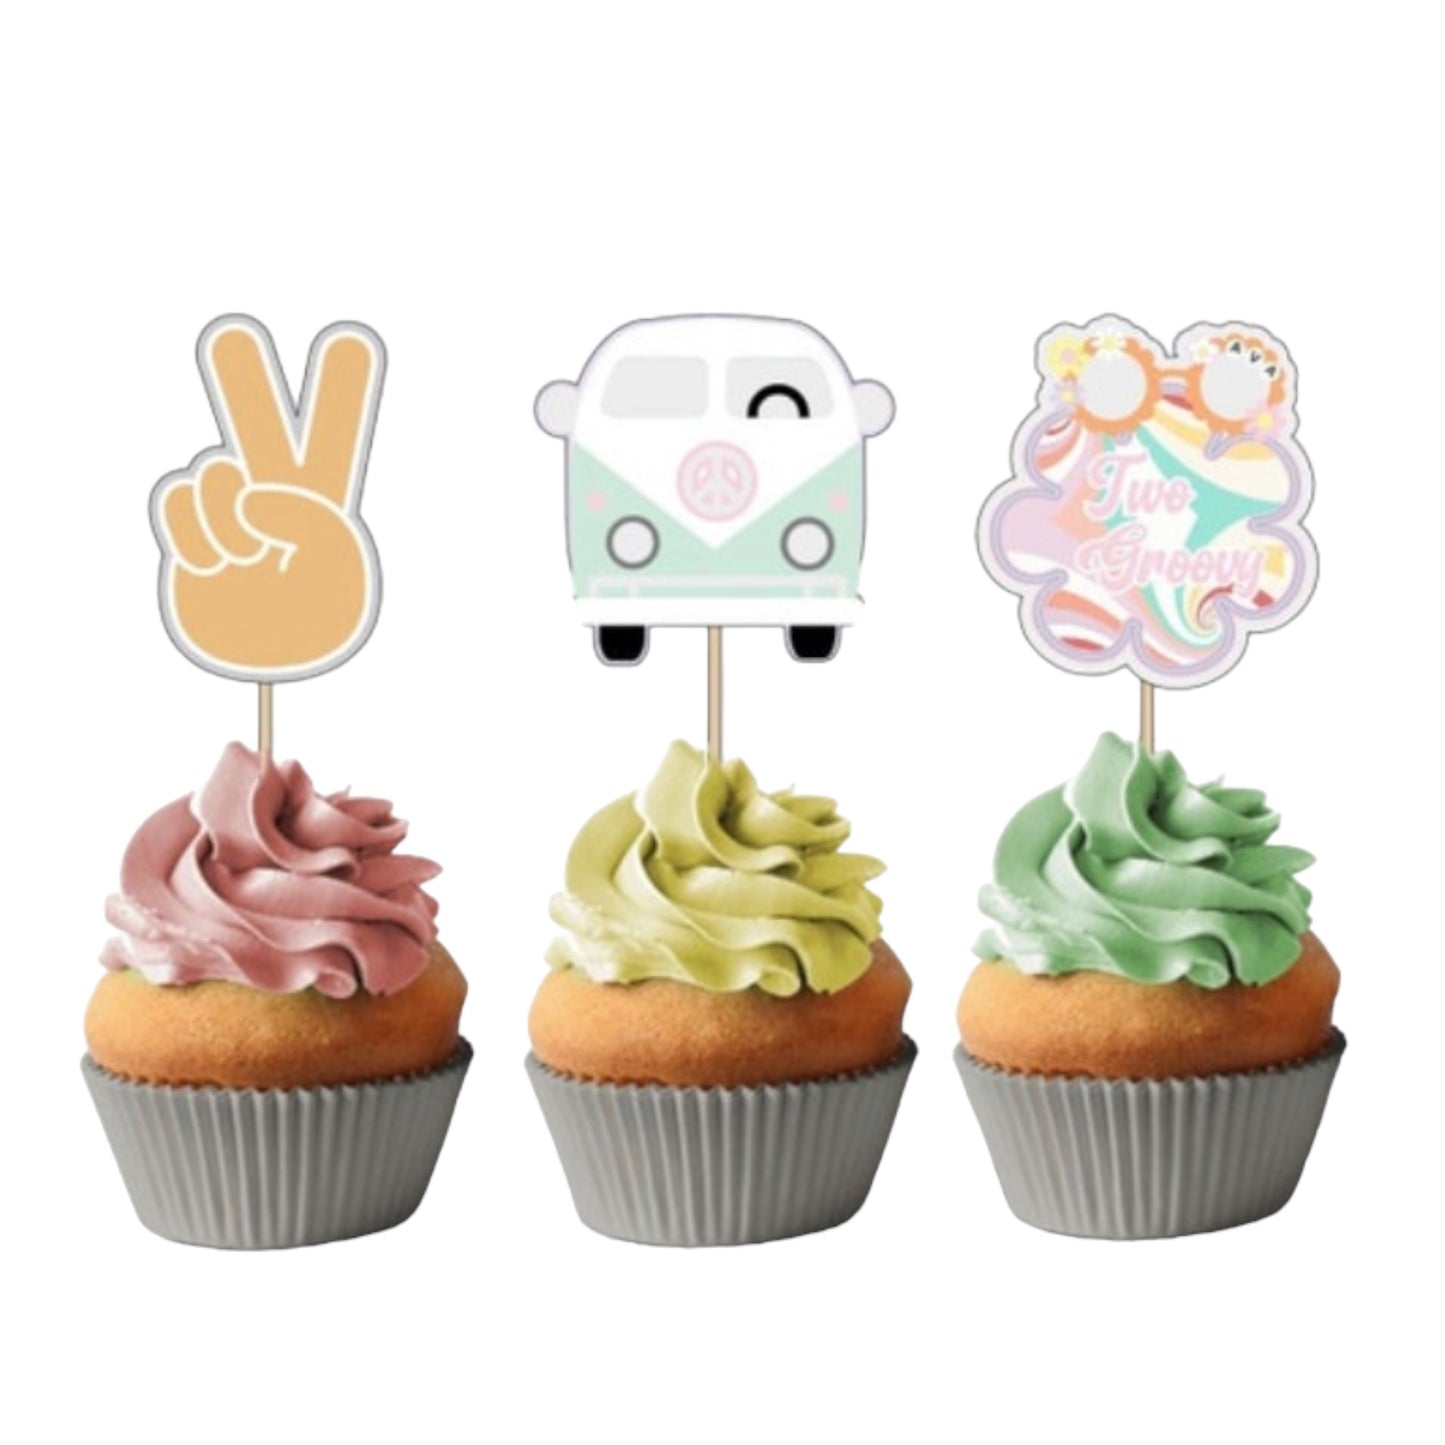 5 and groovy cupcake topper